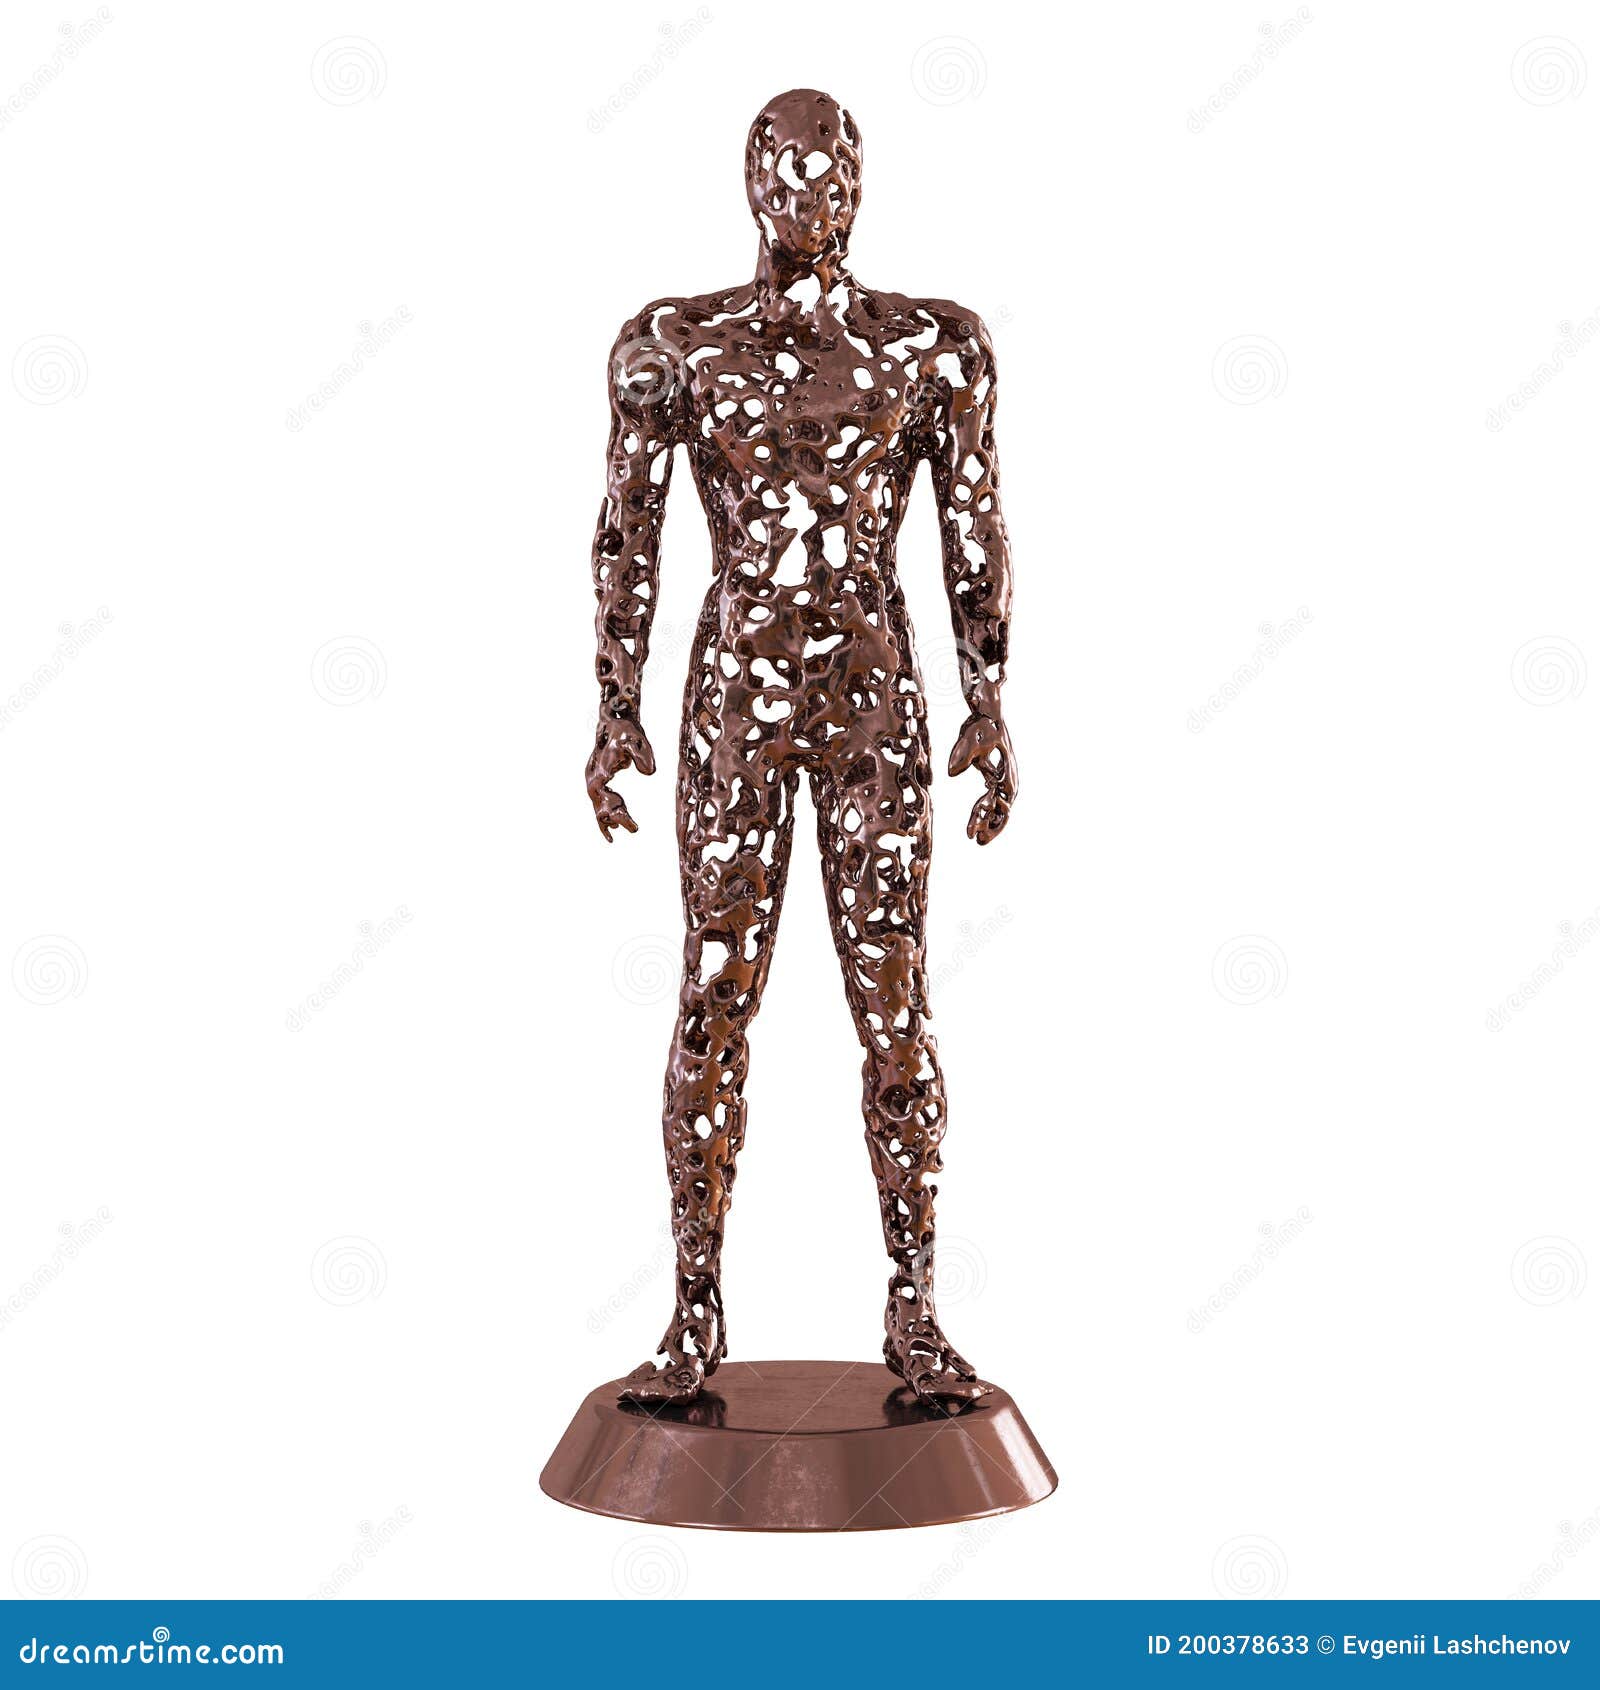 https://thumbs.dreamstime.com/z/iron-sculpture-man-made-metal-many-holes-all-over-his-body-d-rendering-iron-sculpture-man-made-metal-many-200378633.jpg